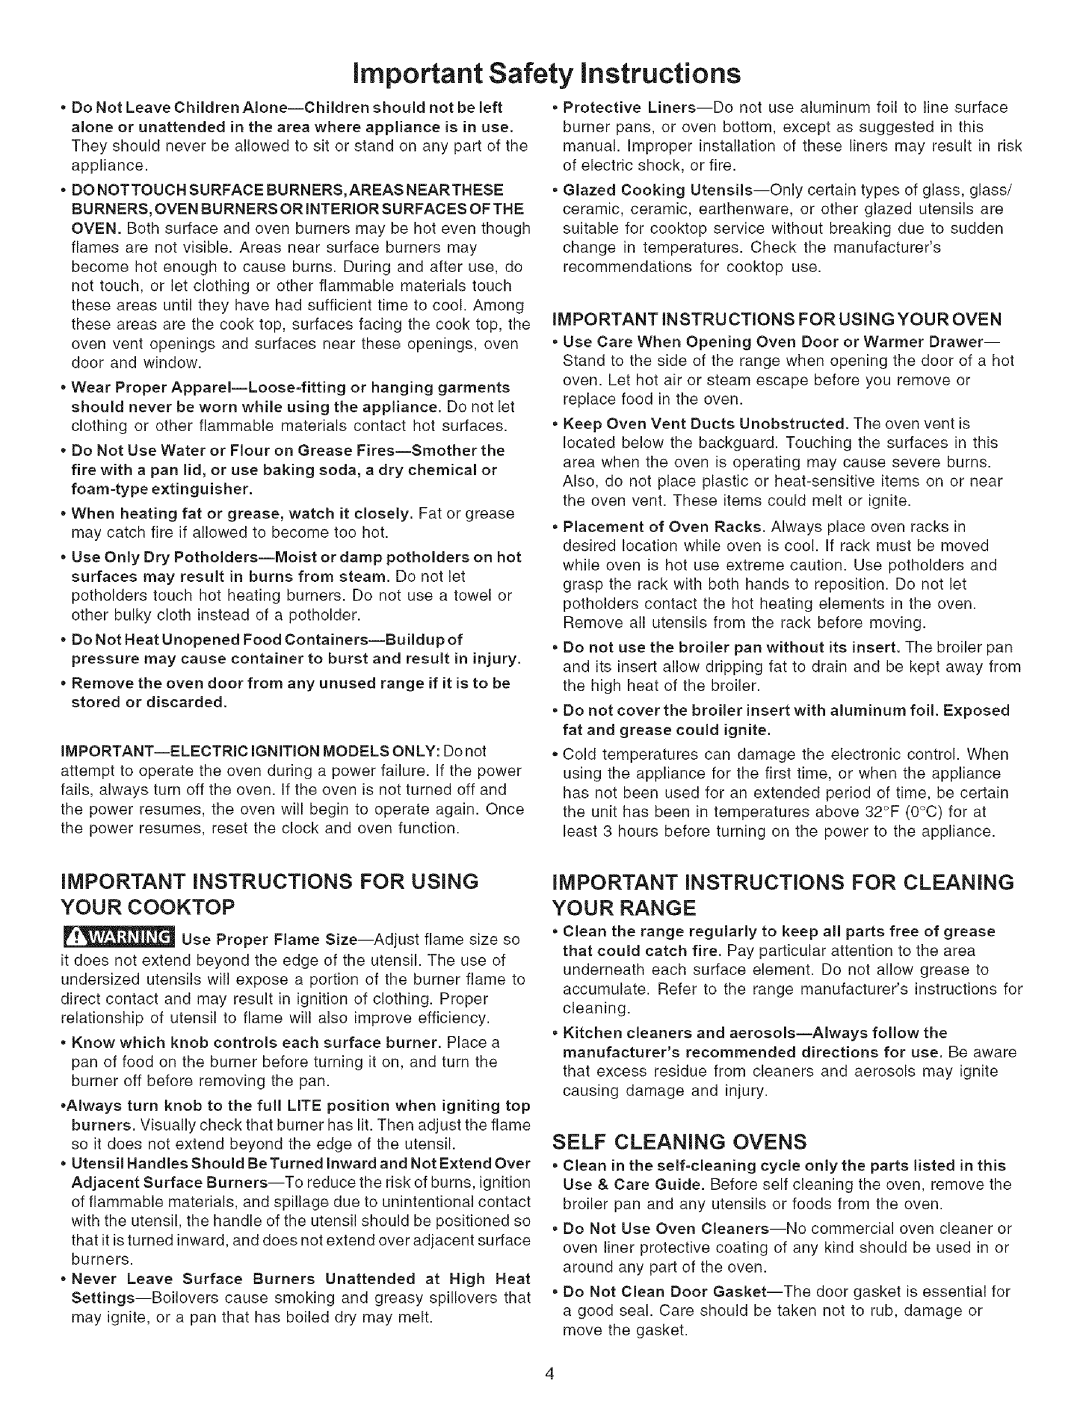 Kenmore 790.7946 manual important Safety instructions, Important Instructions For Using Your Cooktop, Self Cleaning Ovens 